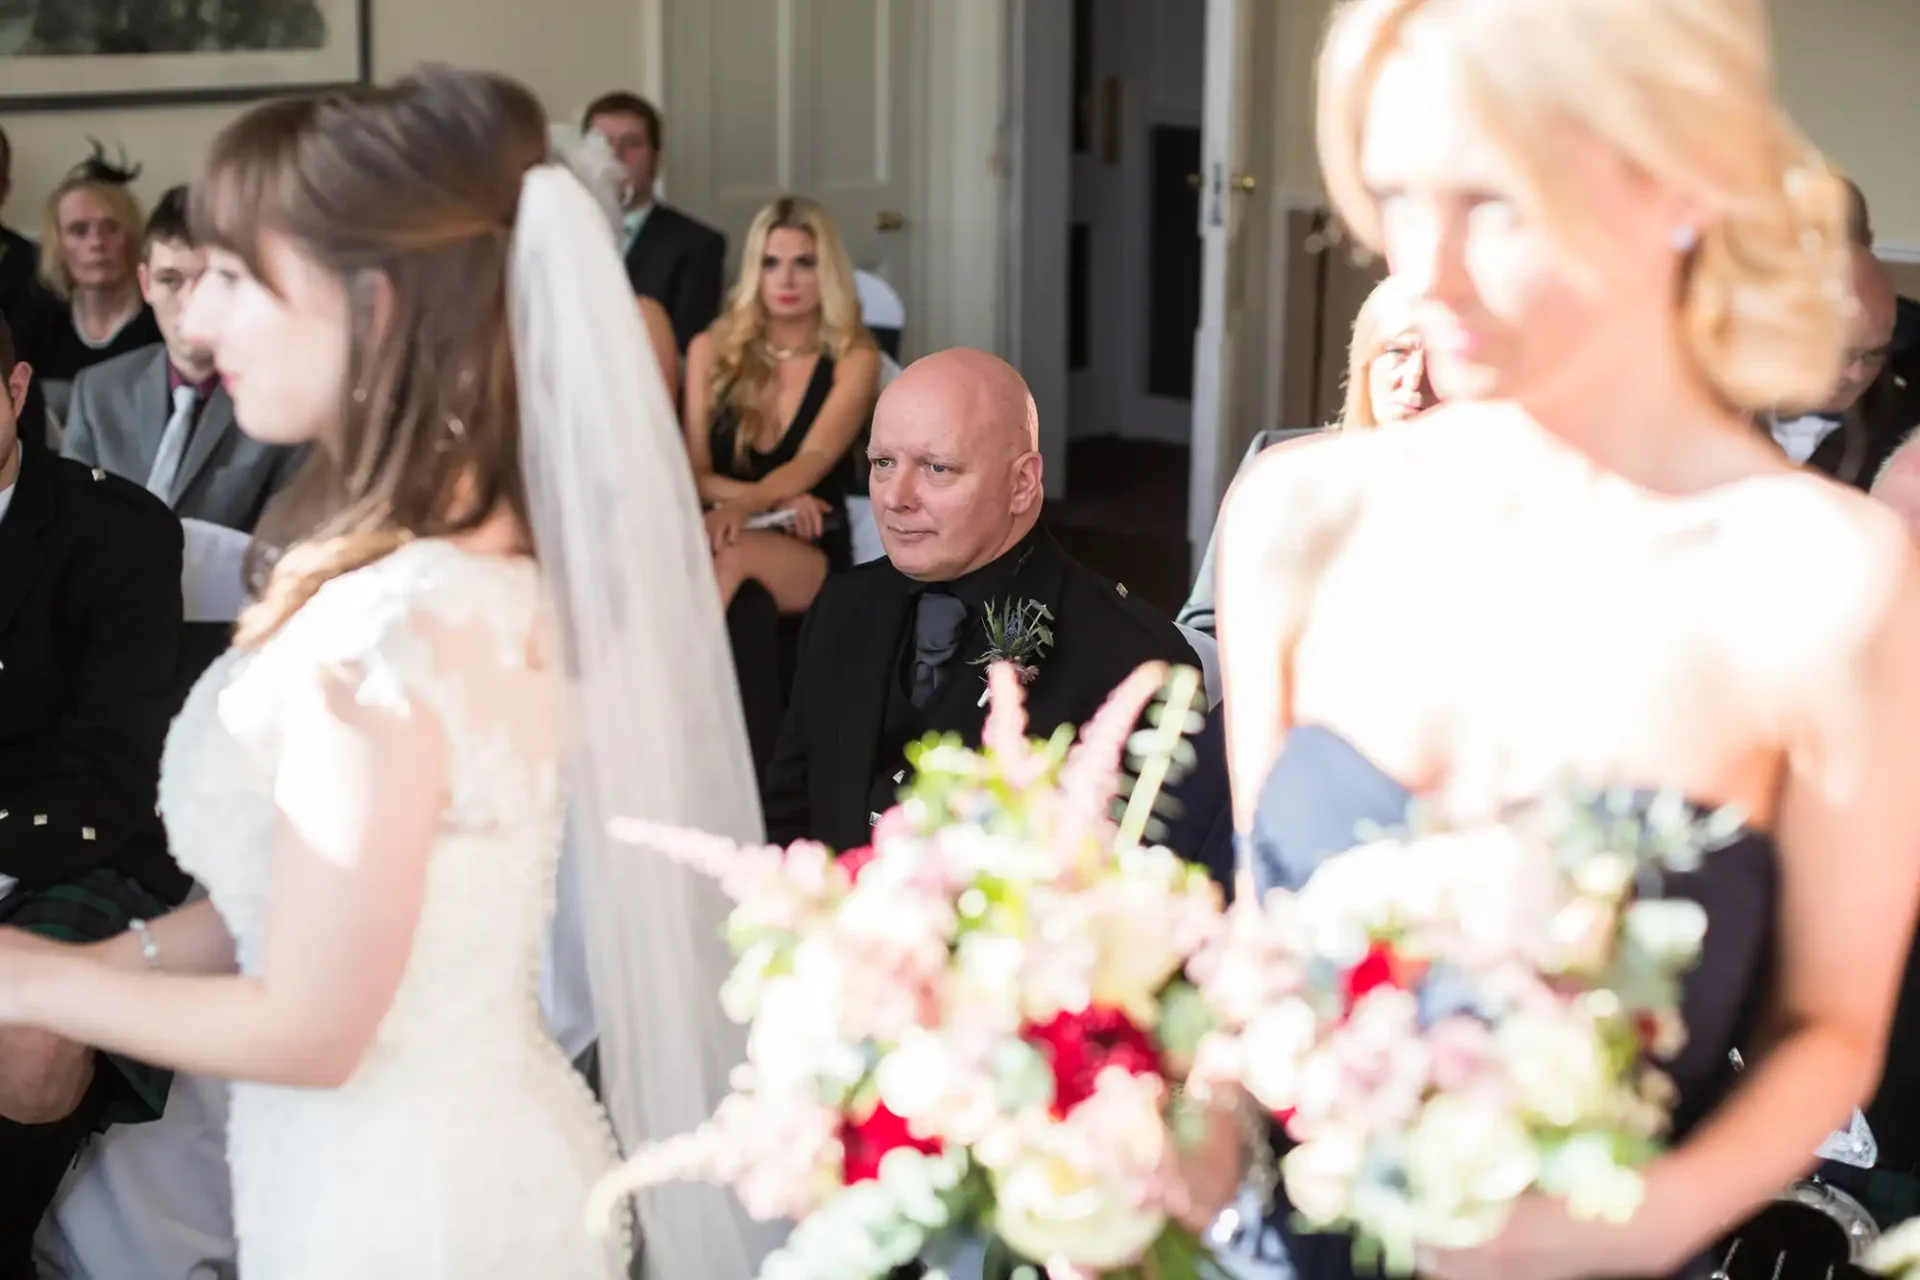 A bride in a white dress and veil walks past seated guests, focusing on a man in the foreground looking reflective.